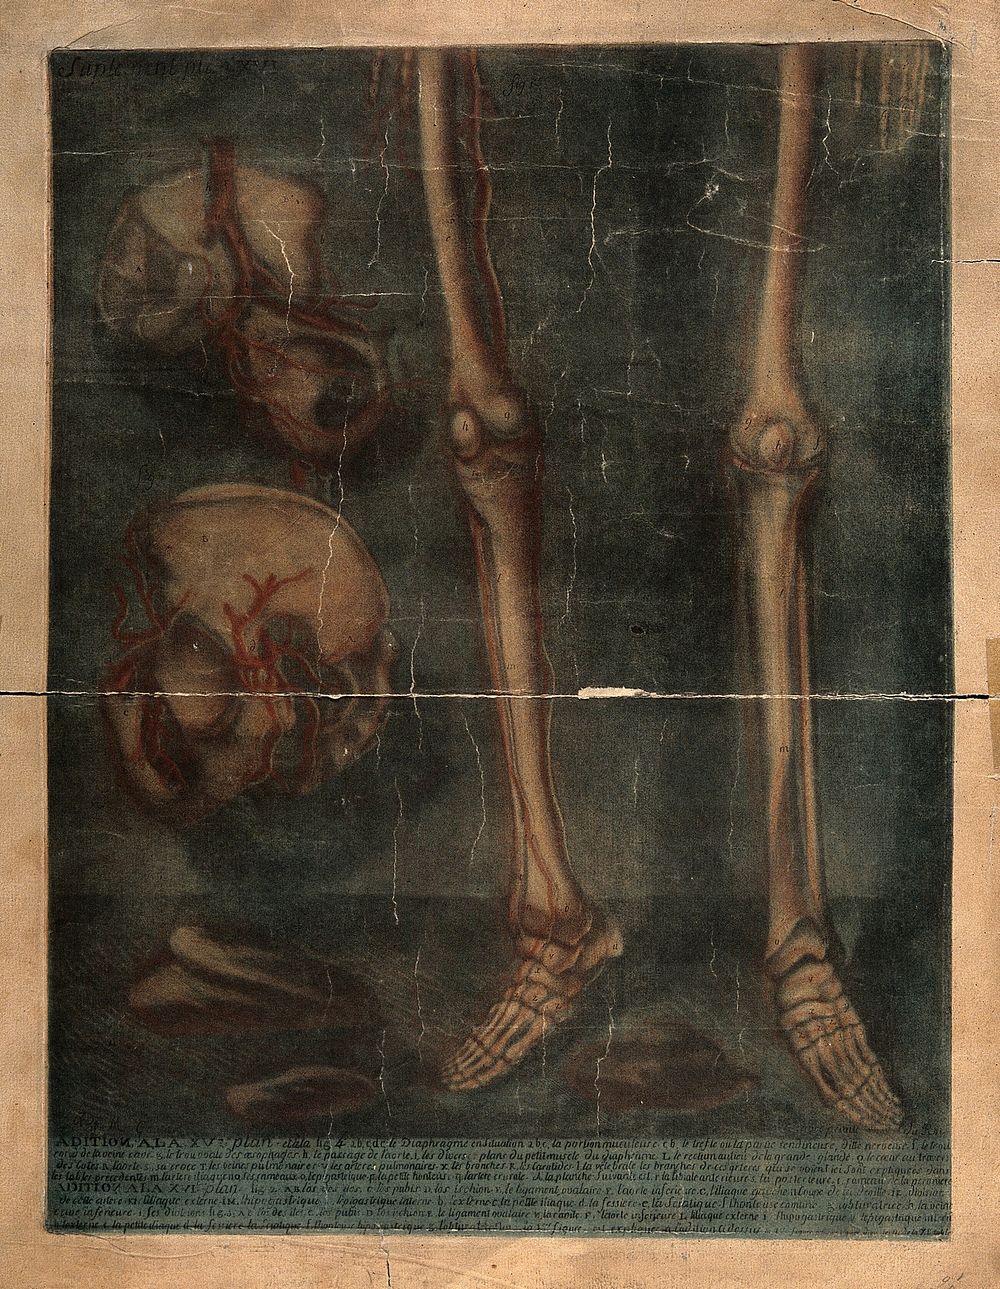 Bones of the pelvis, lower legs and feet. Colour mezzotint by J. F. Gautier d'Agoty after himself, 1759.